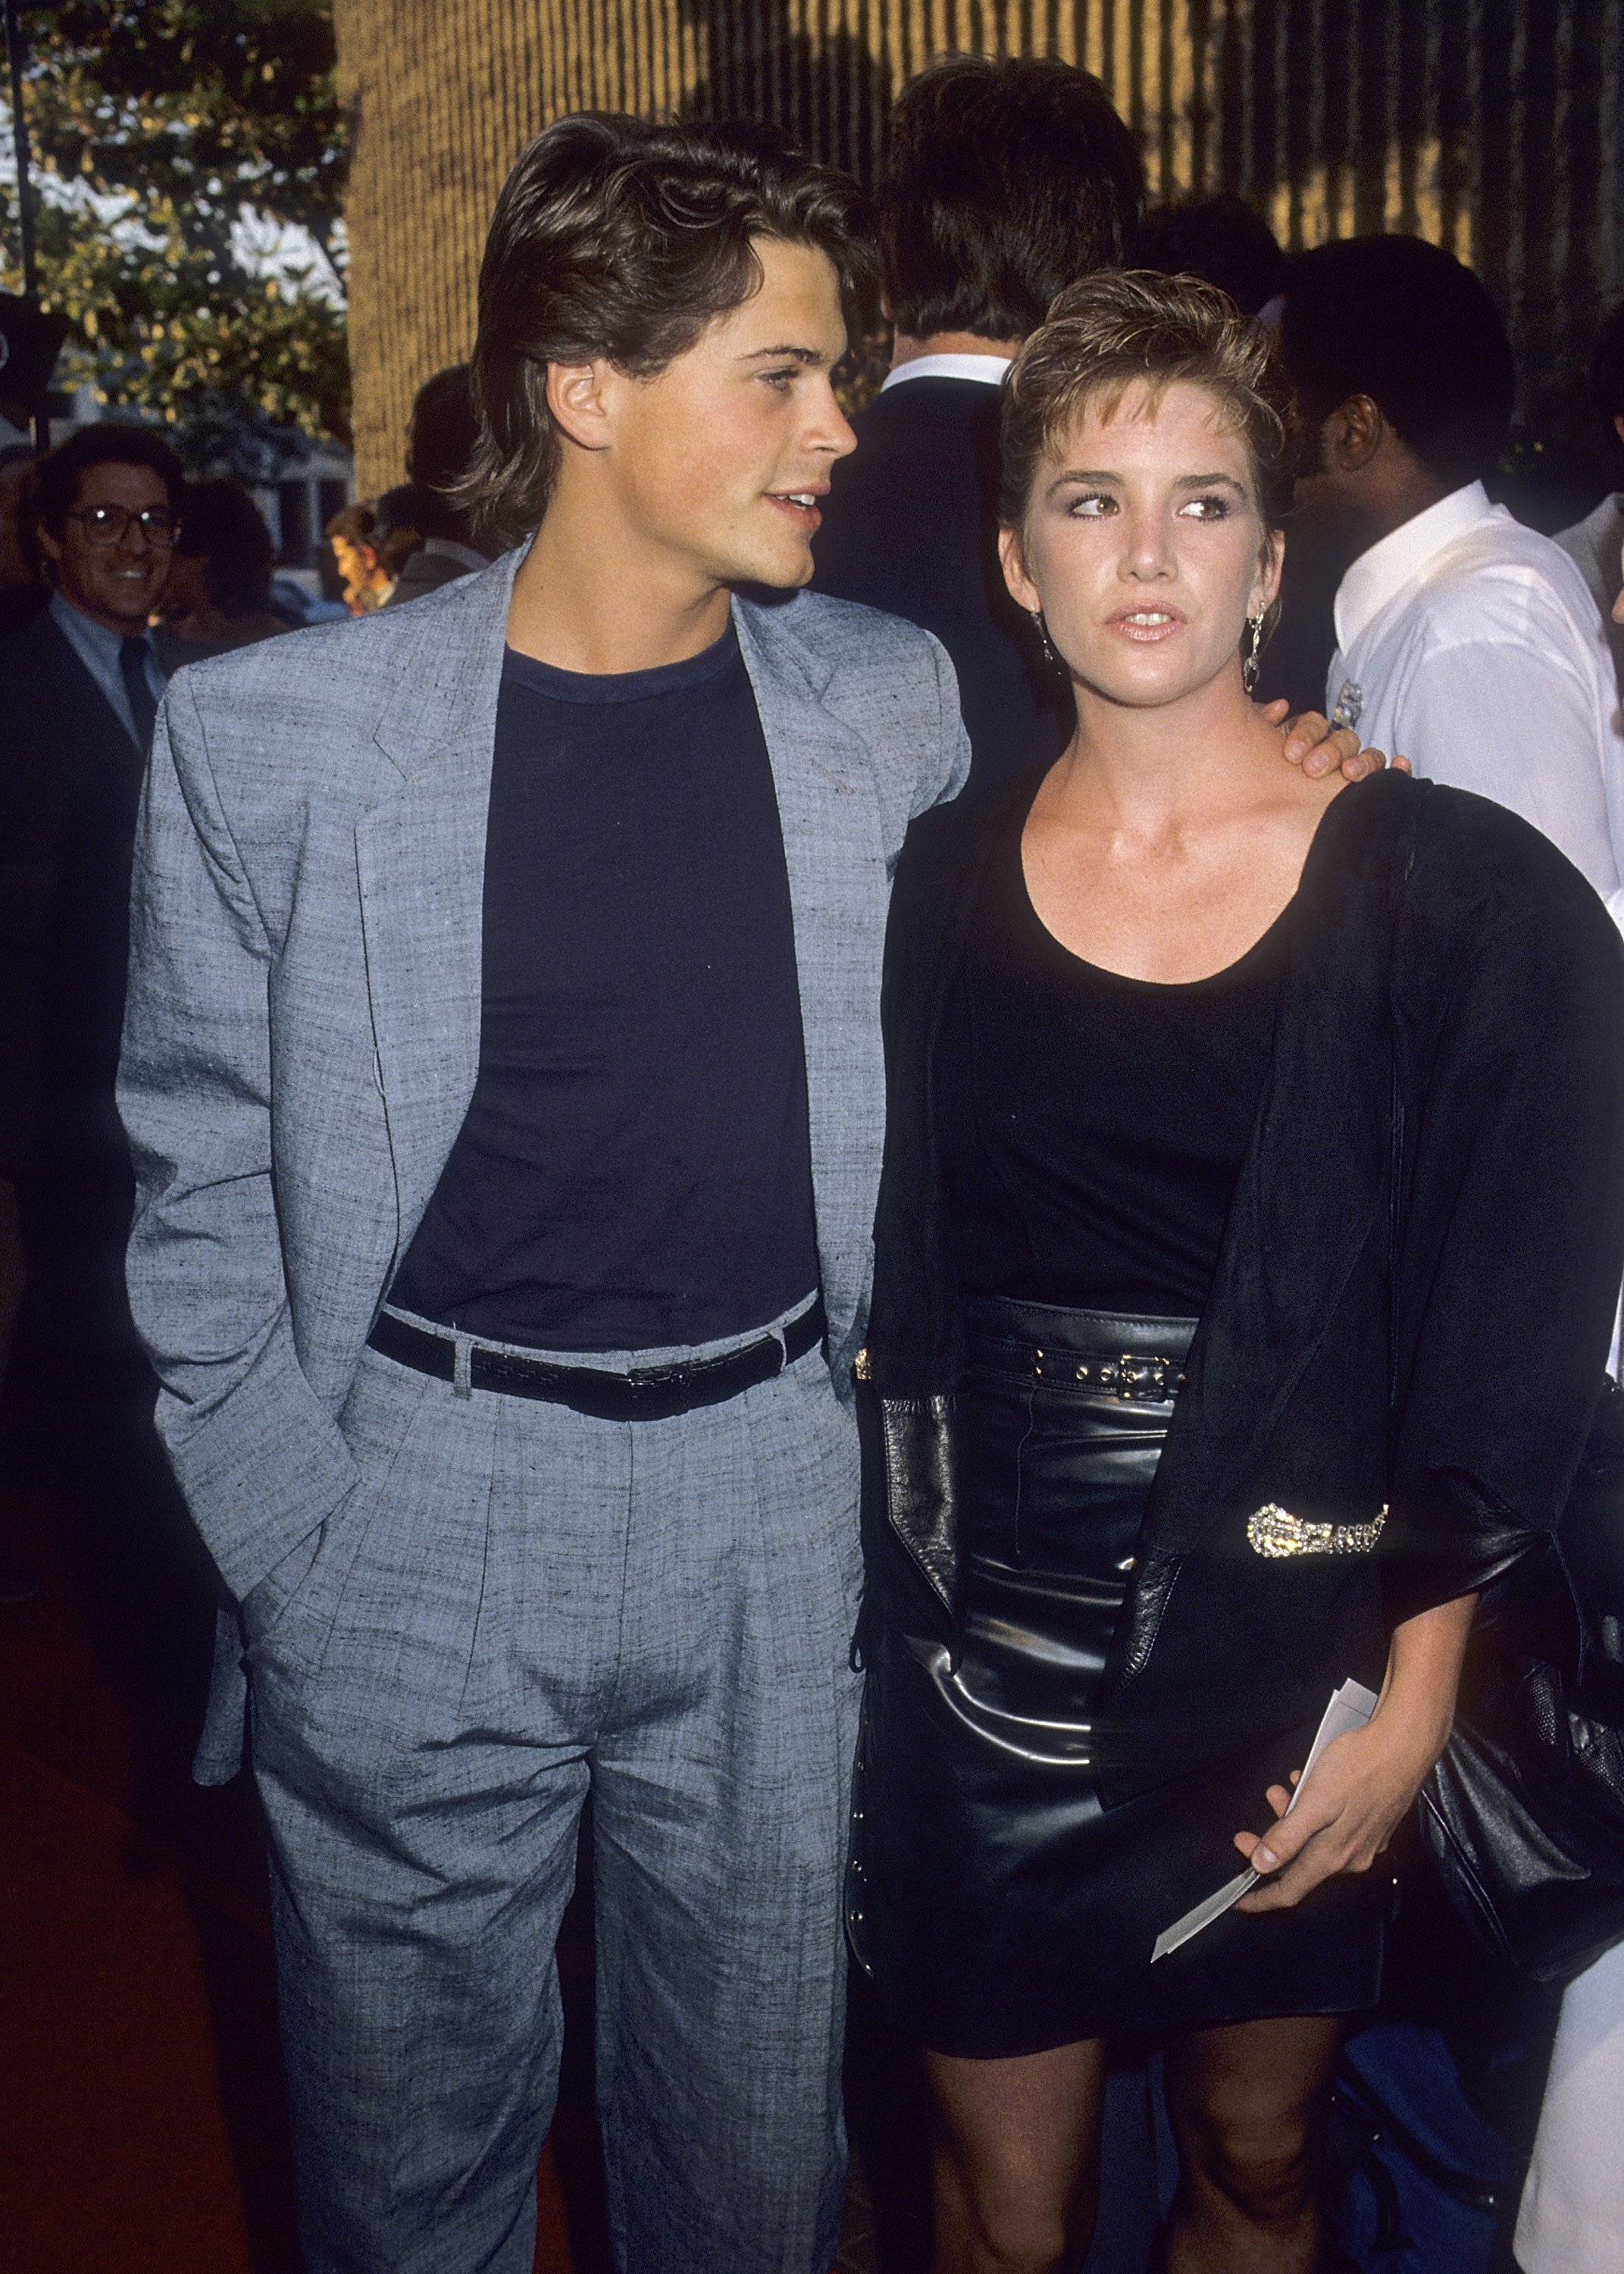 Actor Rob Lowe and actress Melissa Gilbert attend the "Ghostbusters" Westwood Premiere on June 7, 1984 at the Avco Center Cinemas in Westwood, California | Source: Getty Images